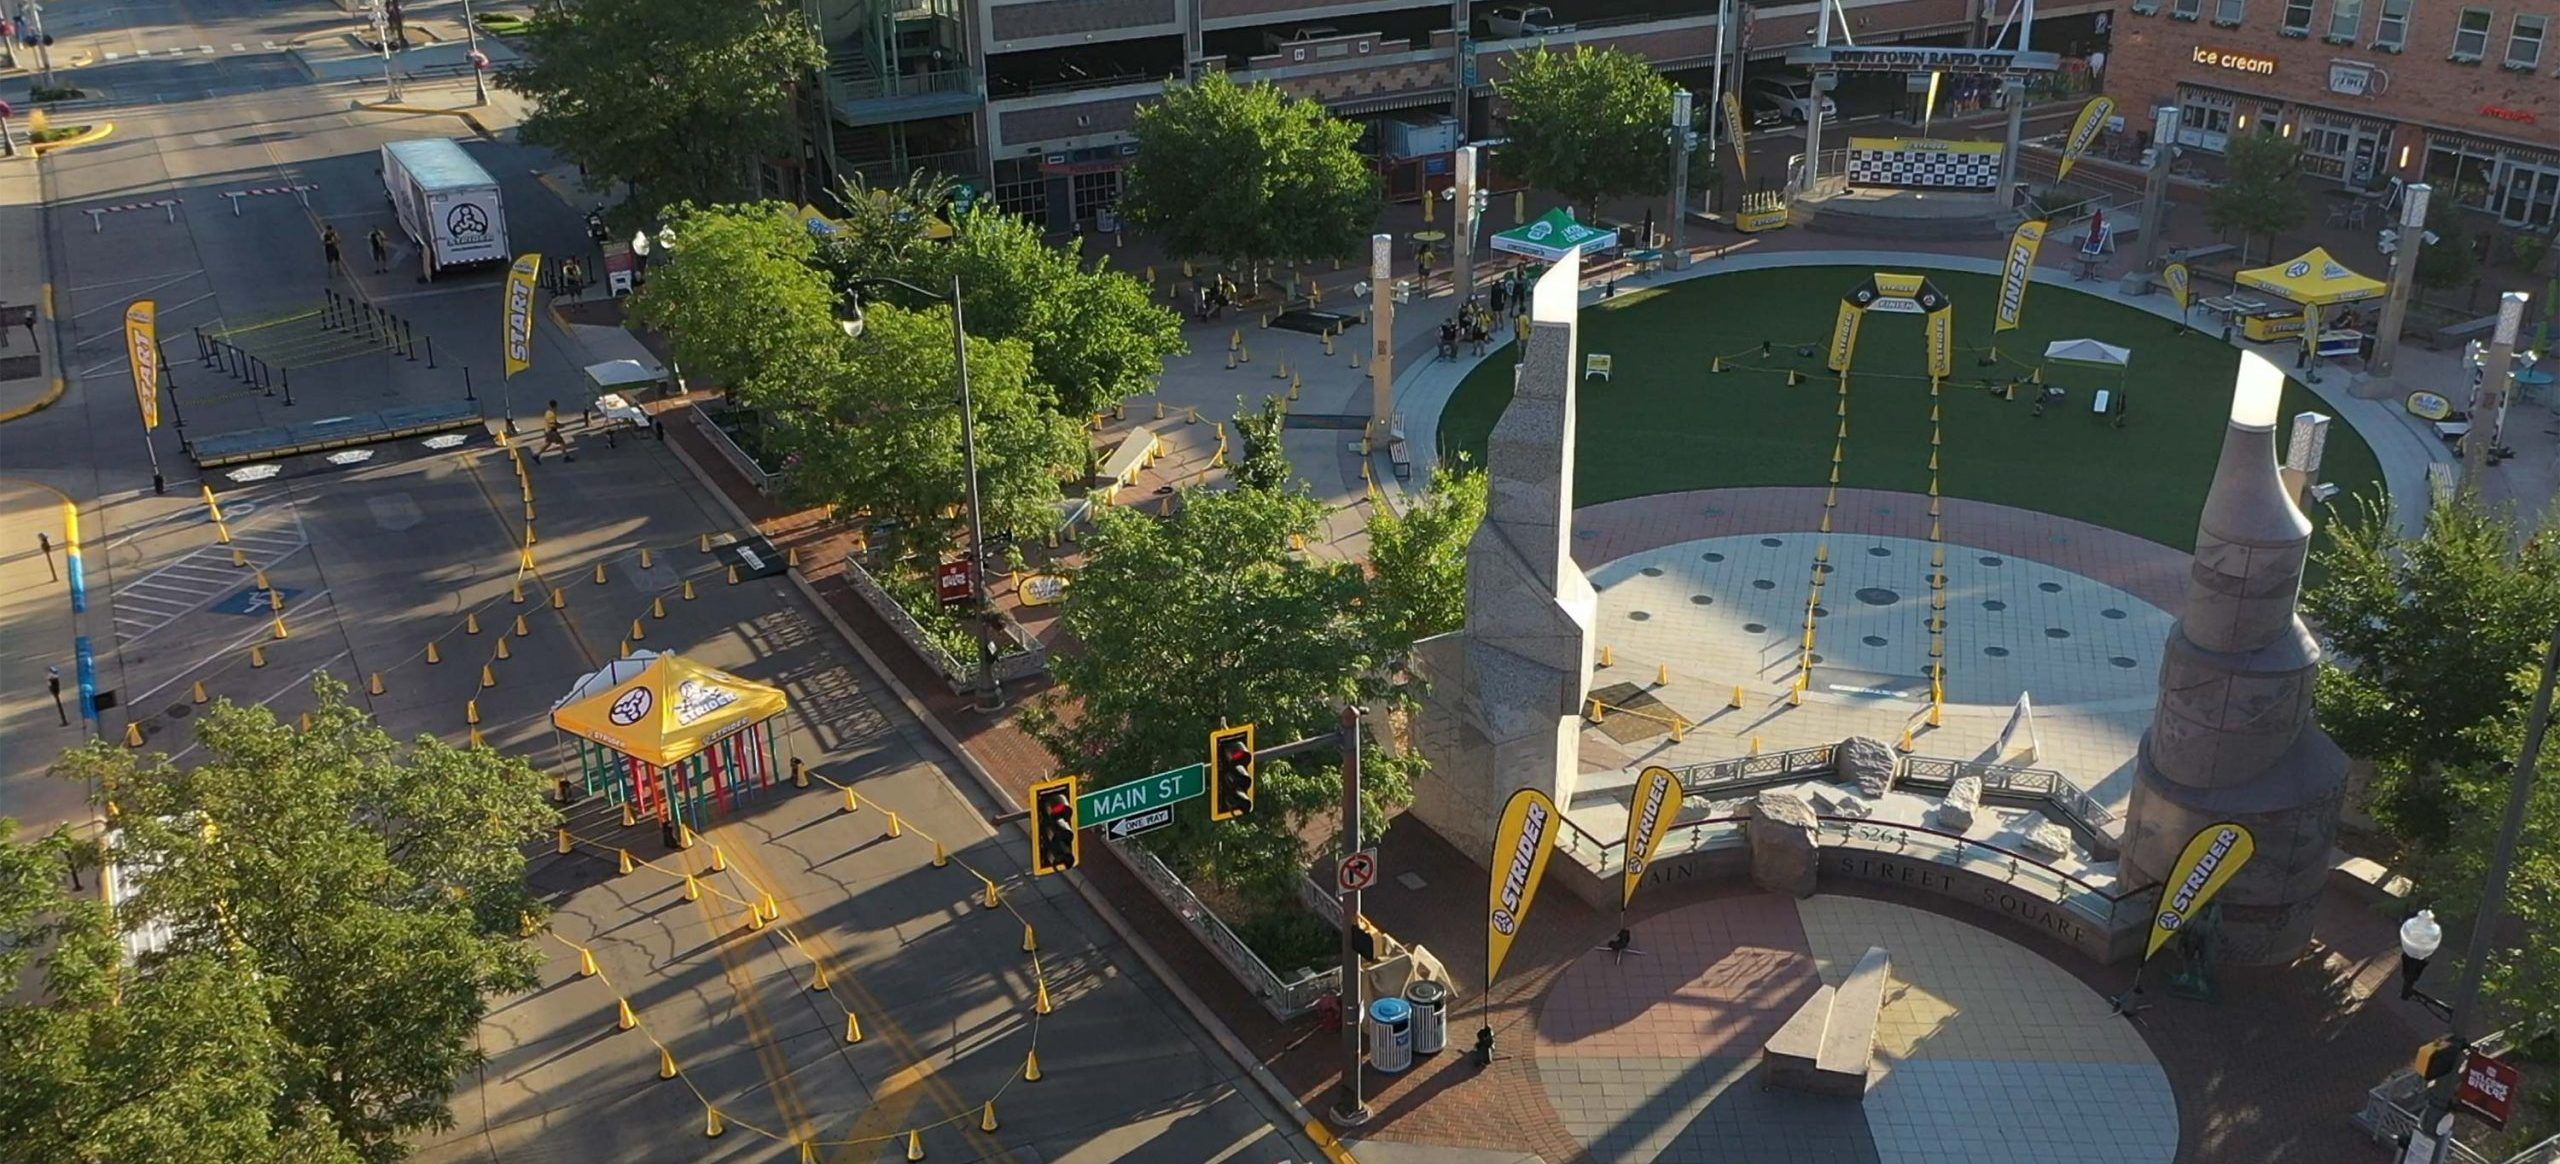 Aerial photo of Strider Cup race course in Rapid City's Main Street Square